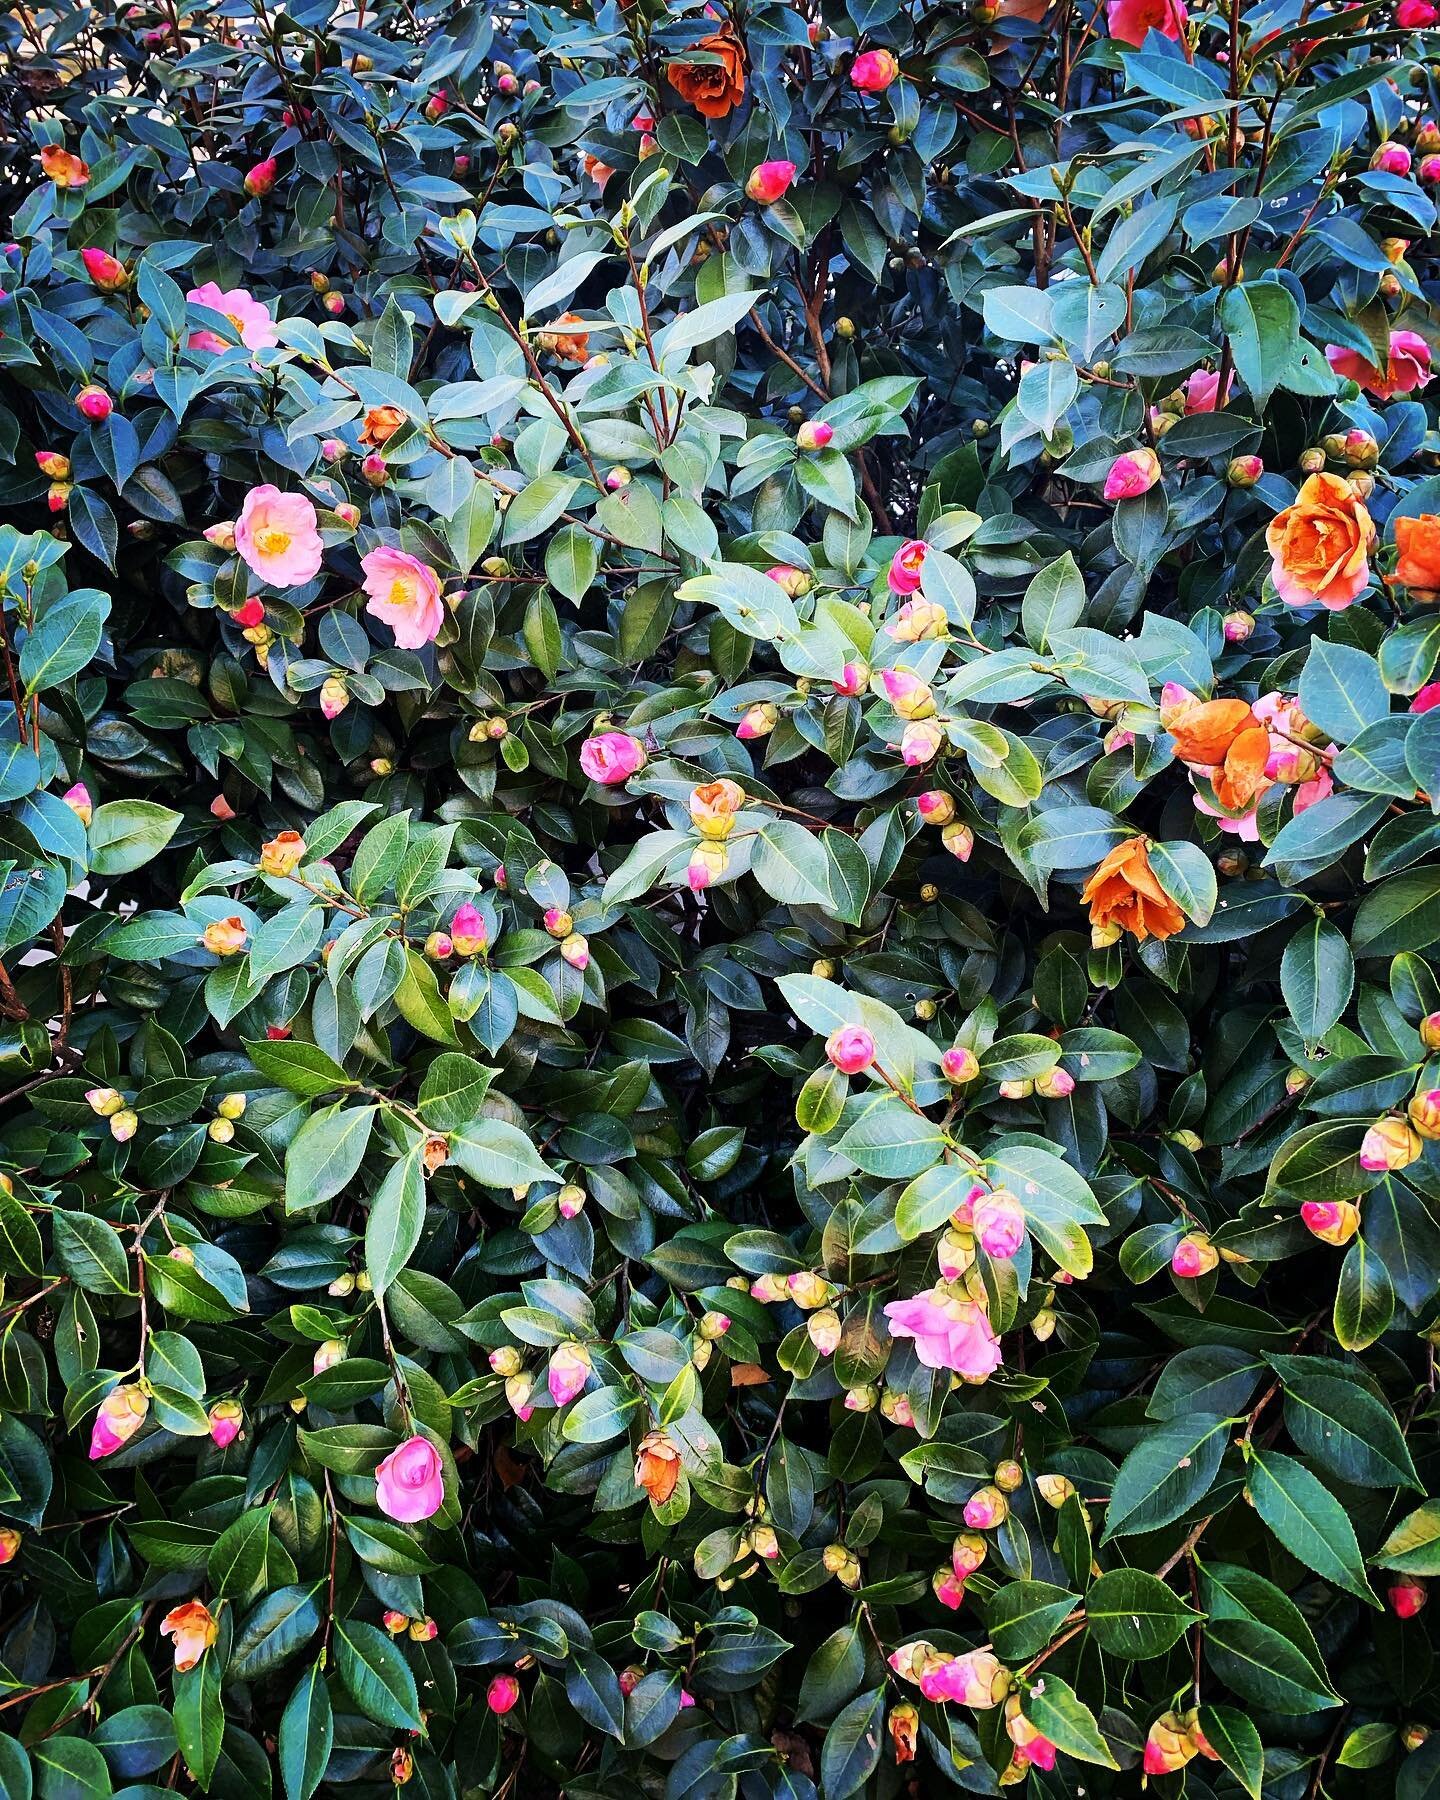 My camellia bushes are bursting, reminding me to carpe that damn diem:

Gather ye Rose-buds while ye may,
 Old Time is still a-flying:
And this same flower that smiles to day,
 To morrow will be dying.